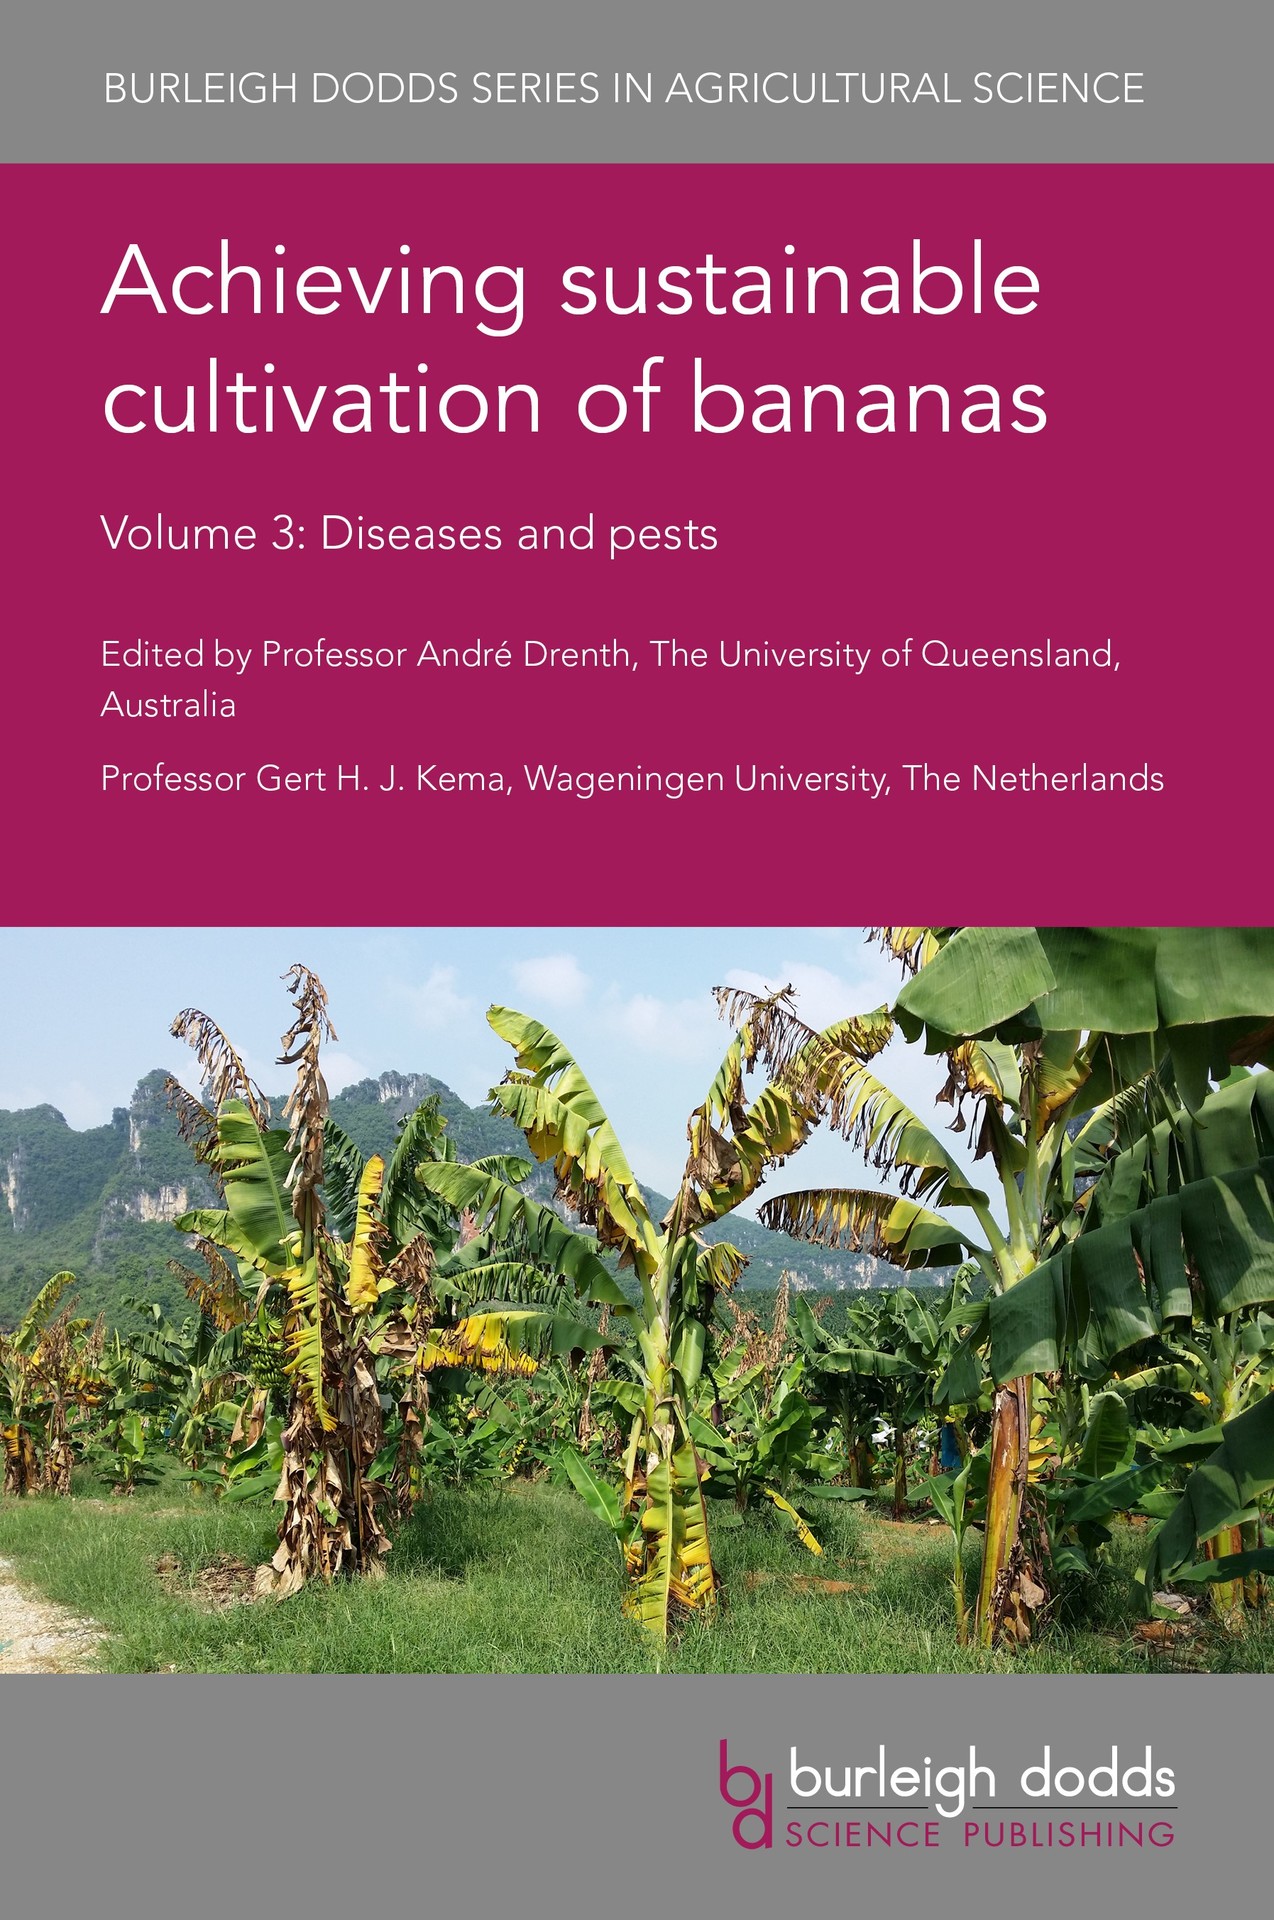 Achieving sustainable cultivation of bananas - Volume 3: Diseases and pests